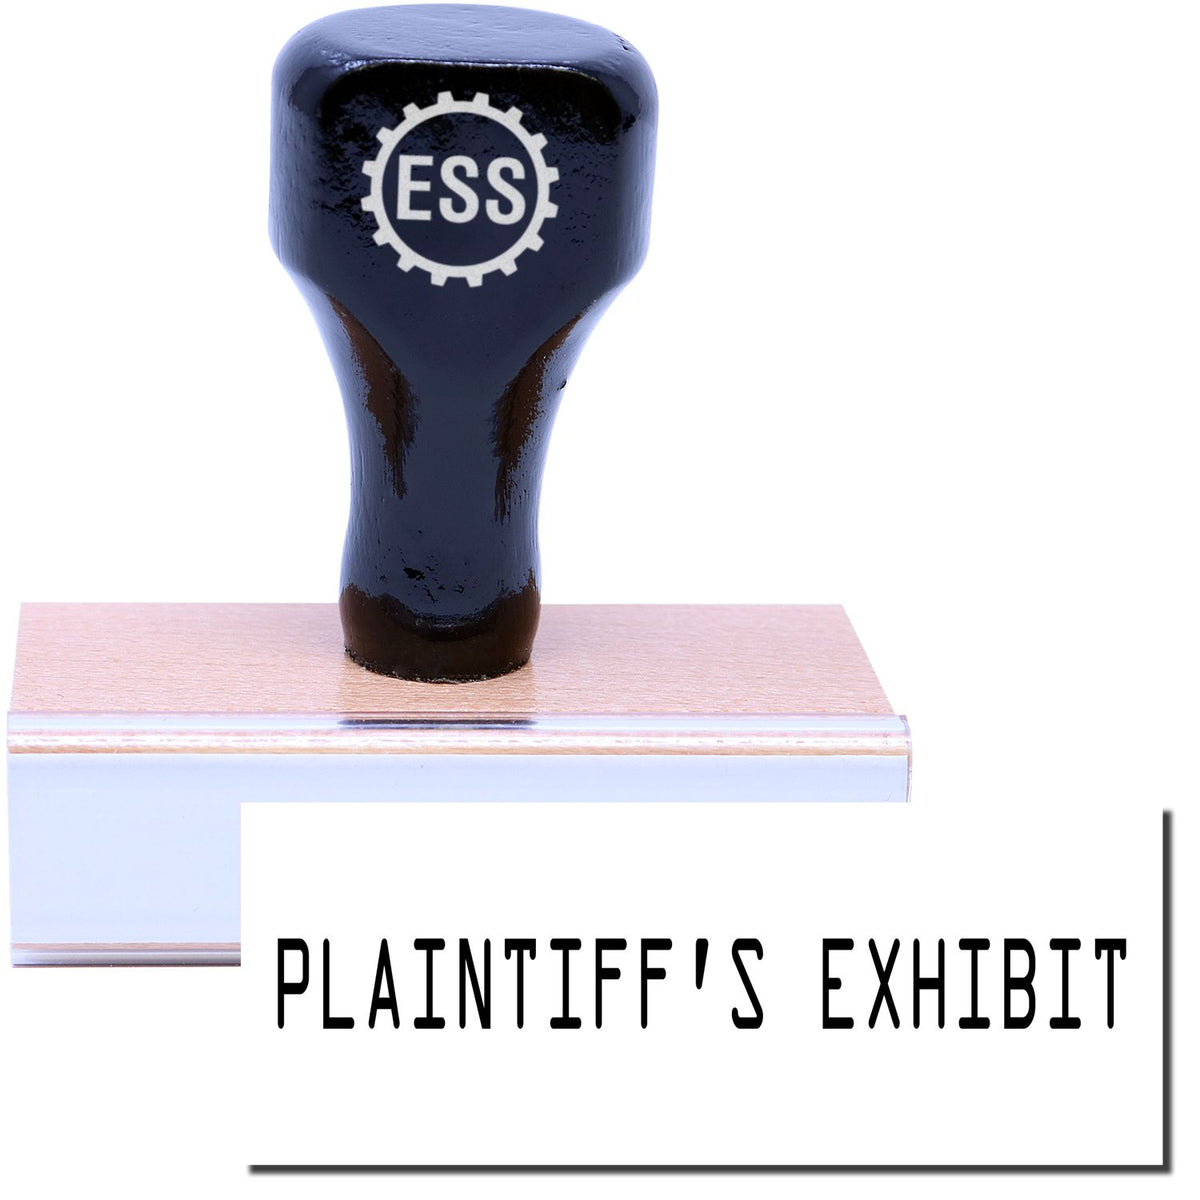 A stock office rubber stamp with a stamped image showing how the text &quot;PLAINTIFF&#39;S EXHIBIT&quot; is displayed after stamping.